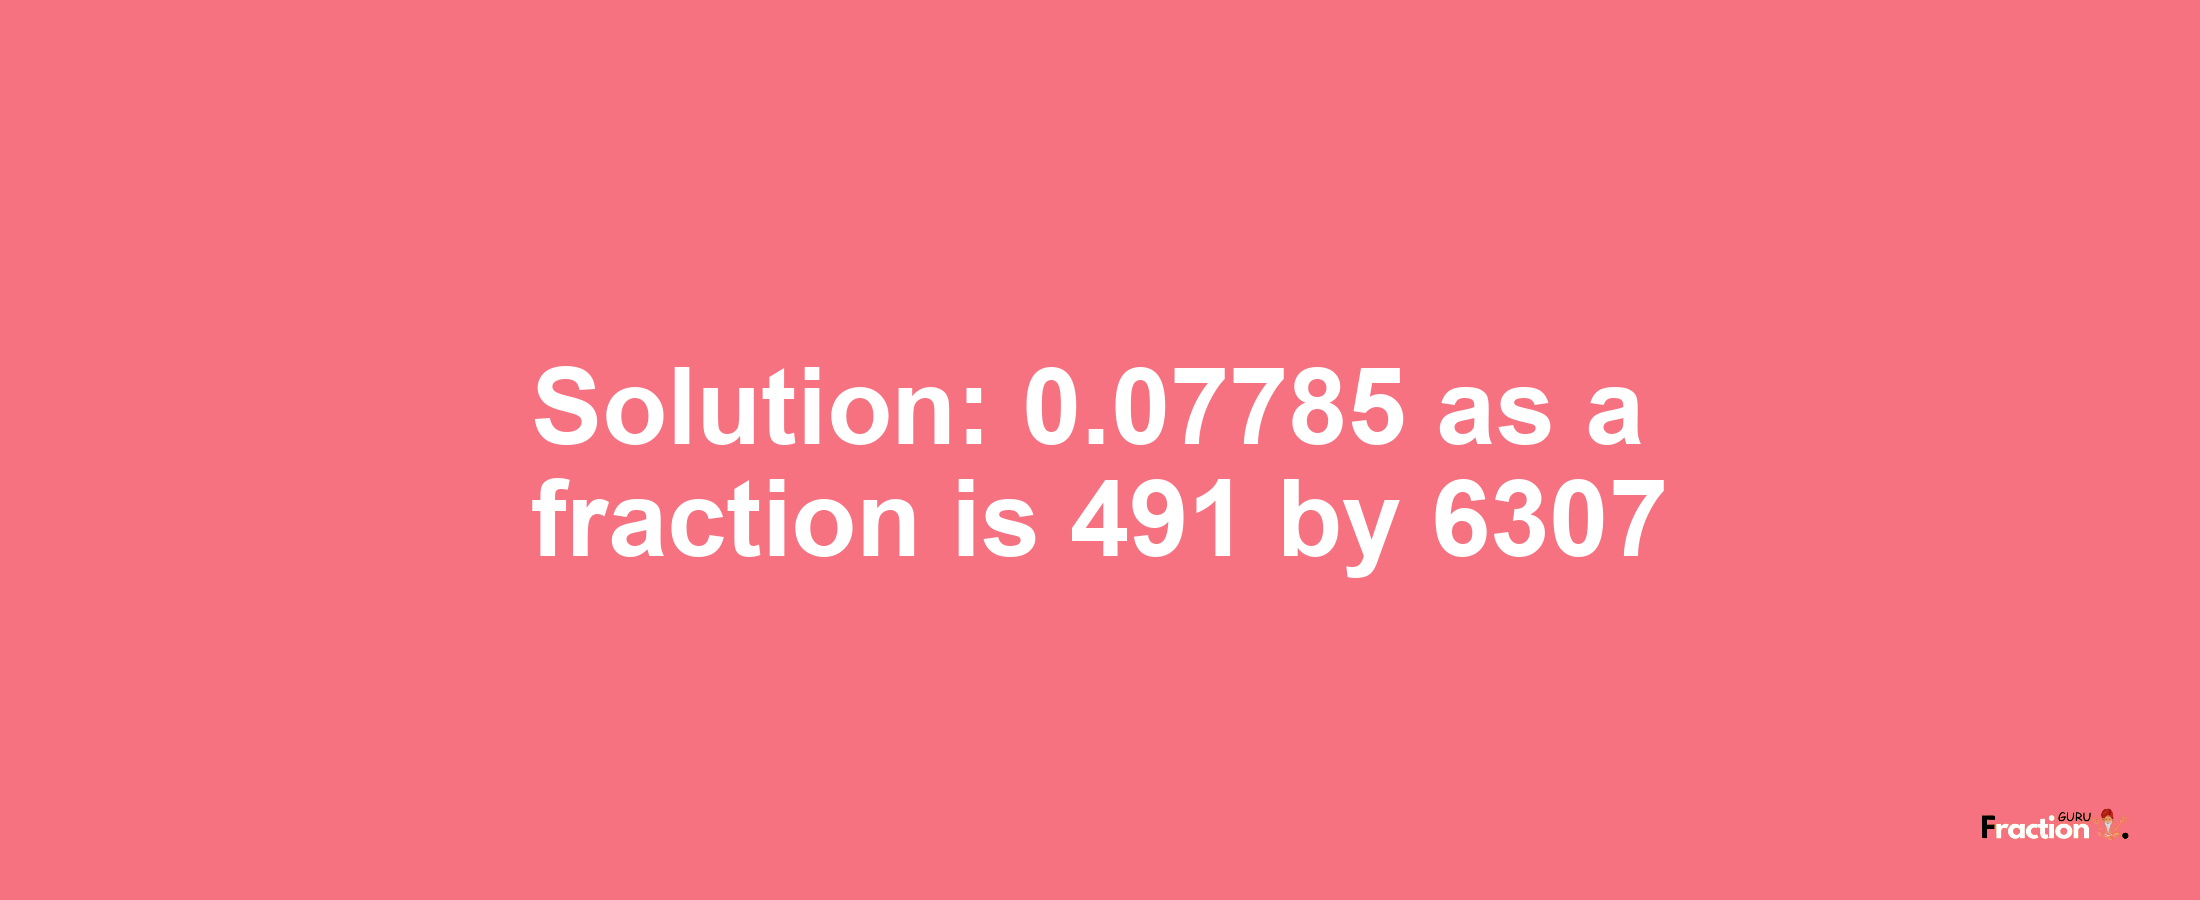 Solution:0.07785 as a fraction is 491/6307